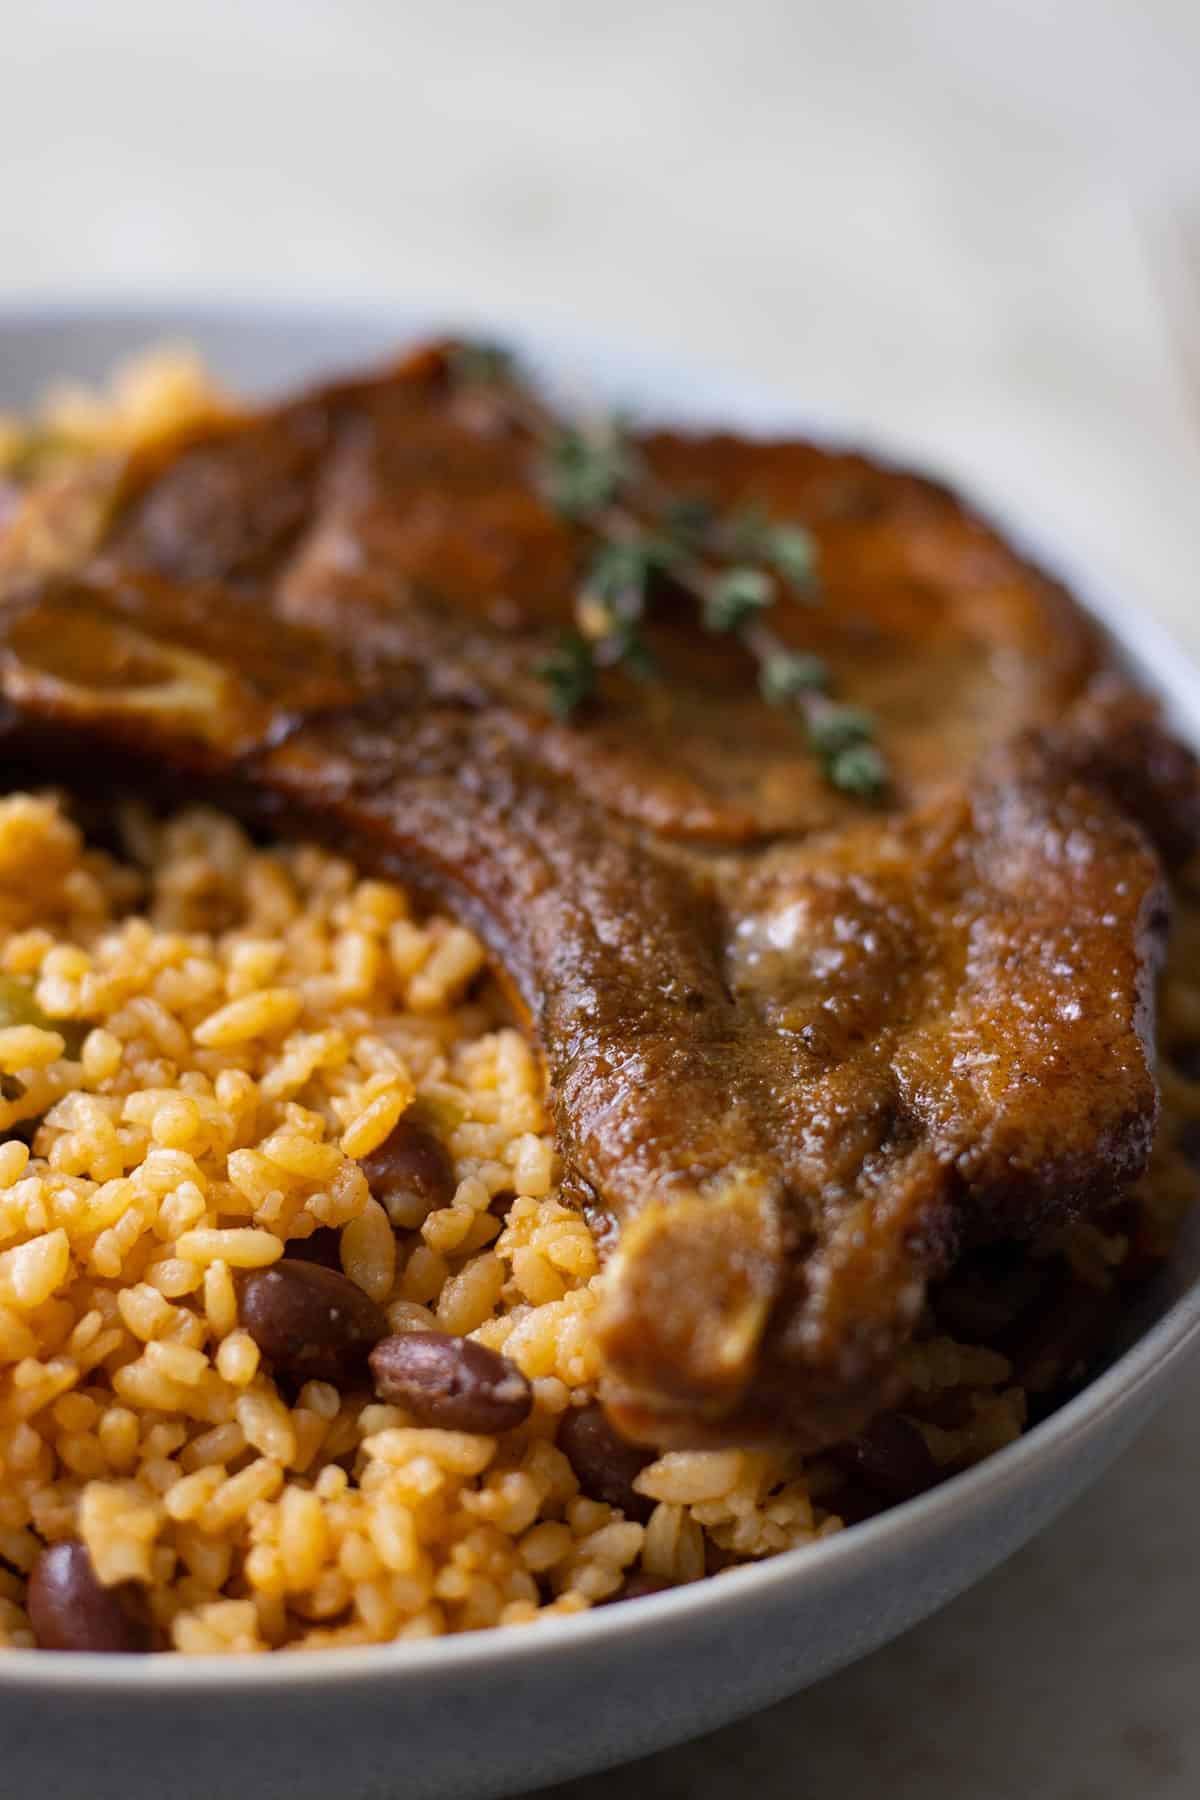 a close up of  a plate with puerto rican rice and beans and a fried pork chop.